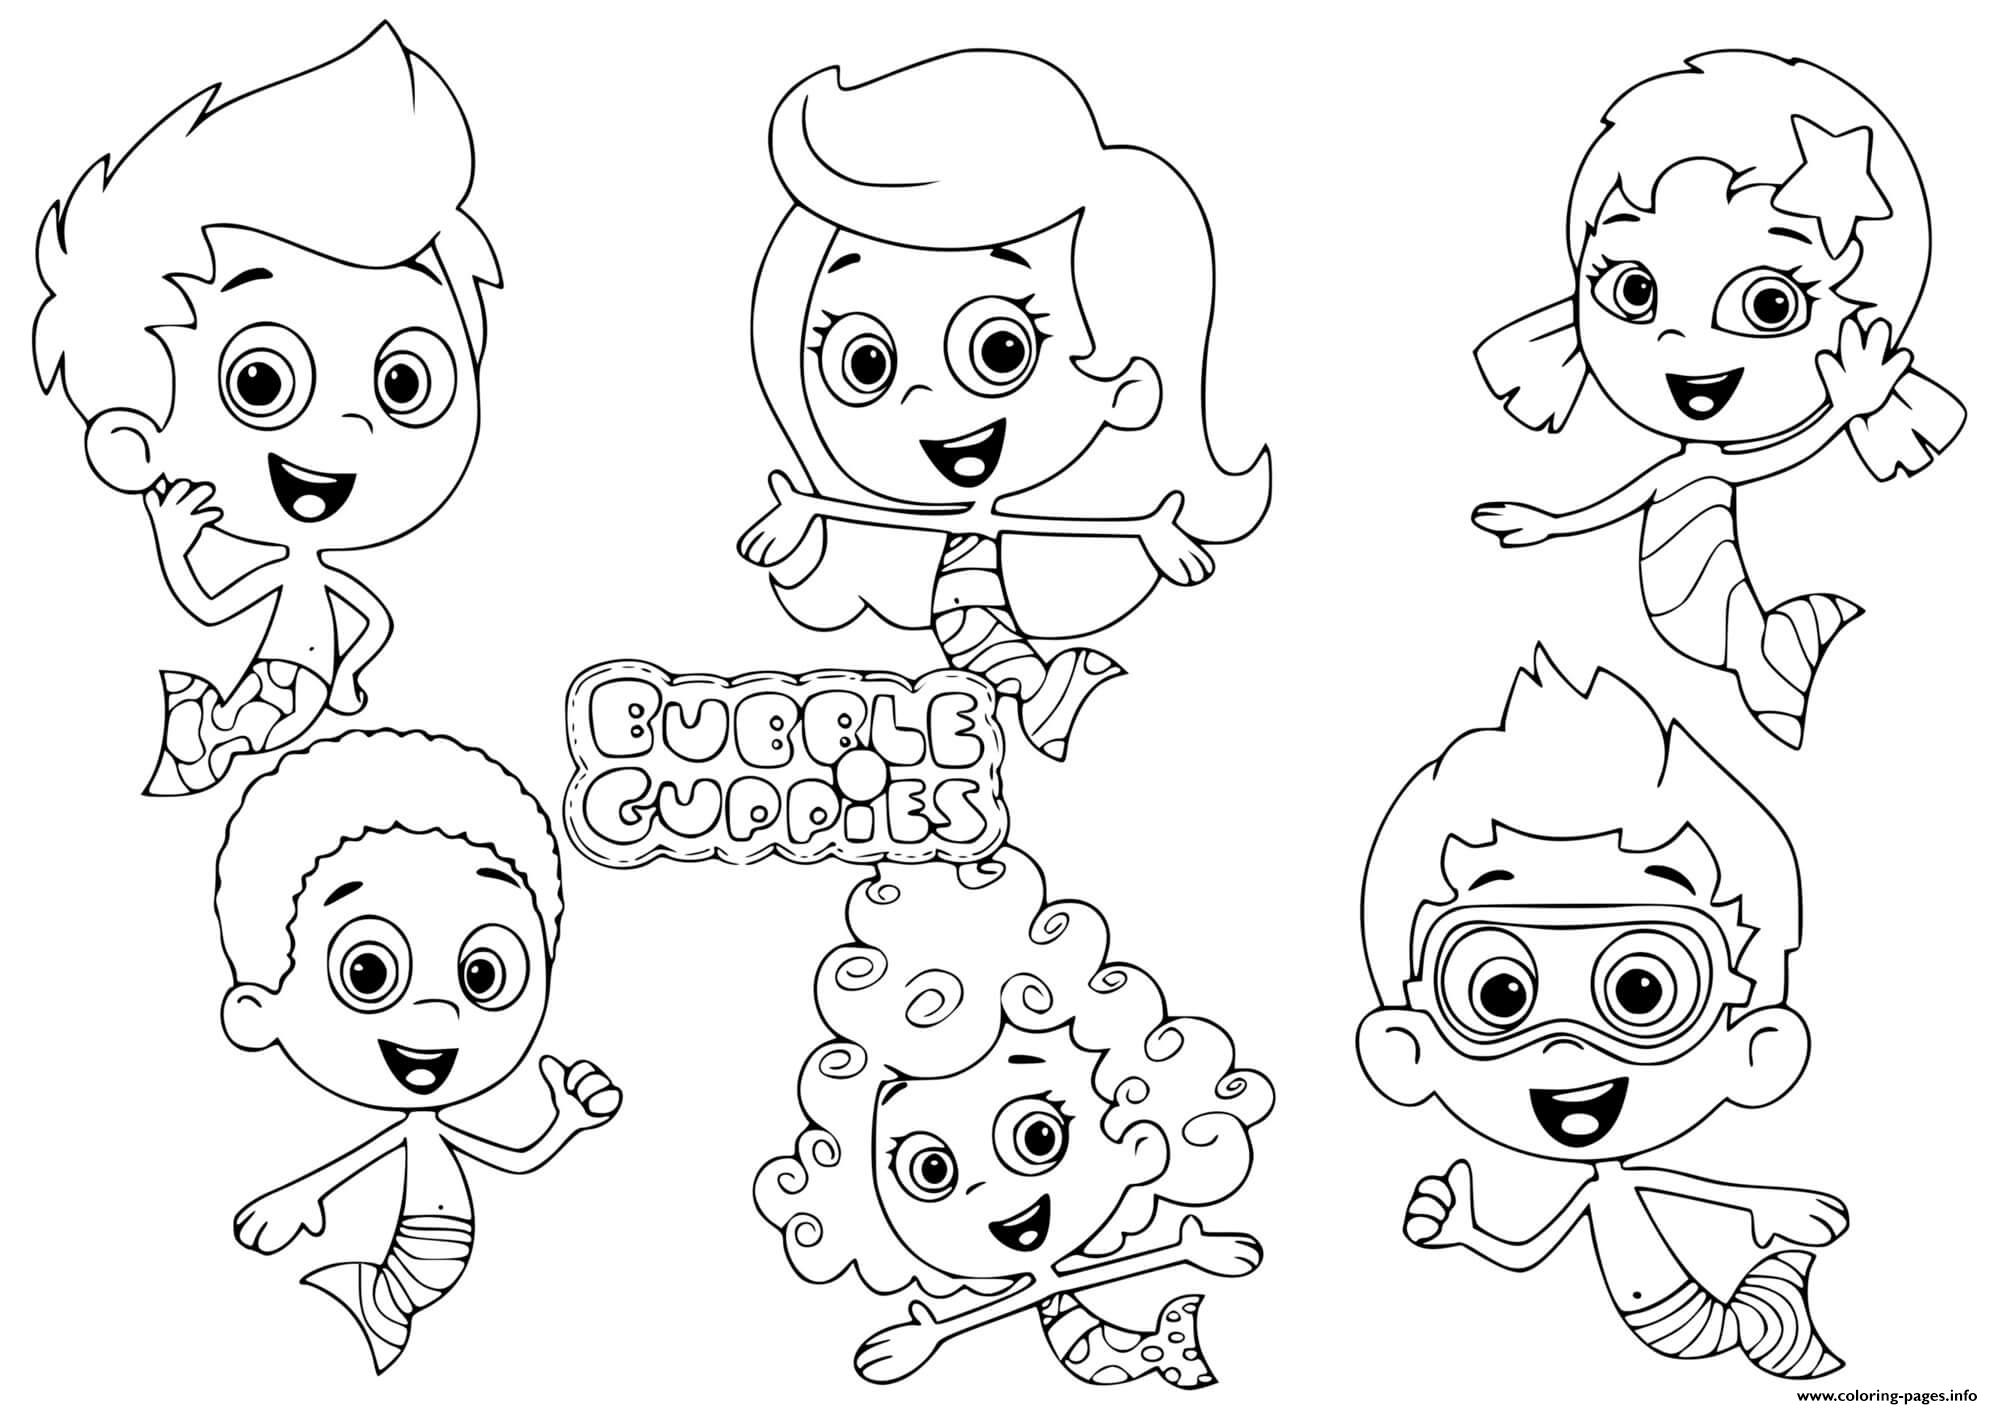 Bubble Guppies Characters Kids coloring pages